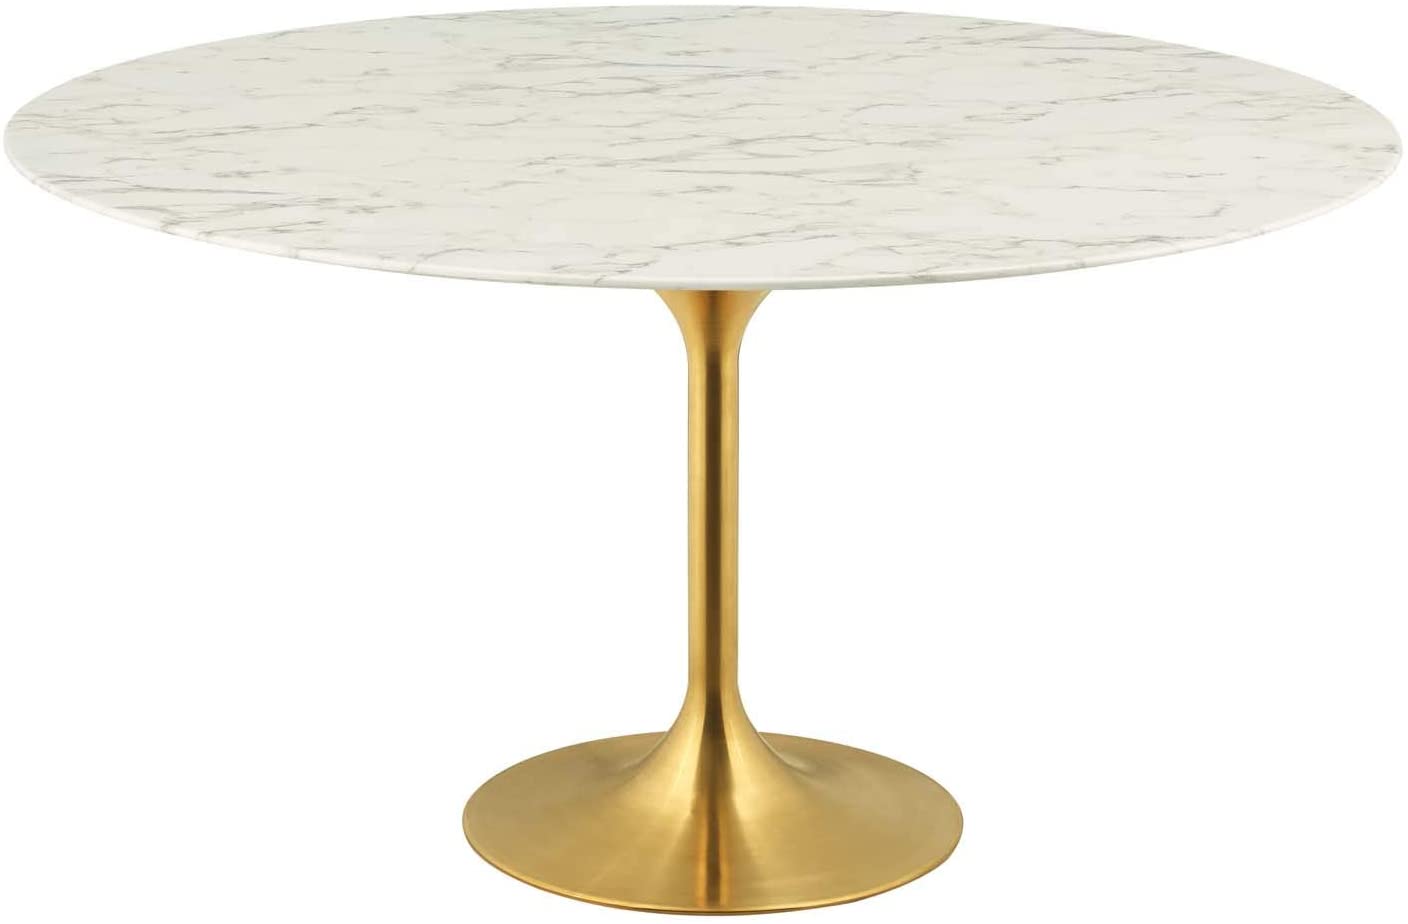 B07PFCR984 America Luxury - Tables Modern Deco Contemporary Kitchen Dining Room Dining Table, Metal Steel Artificial Marble, Gold White